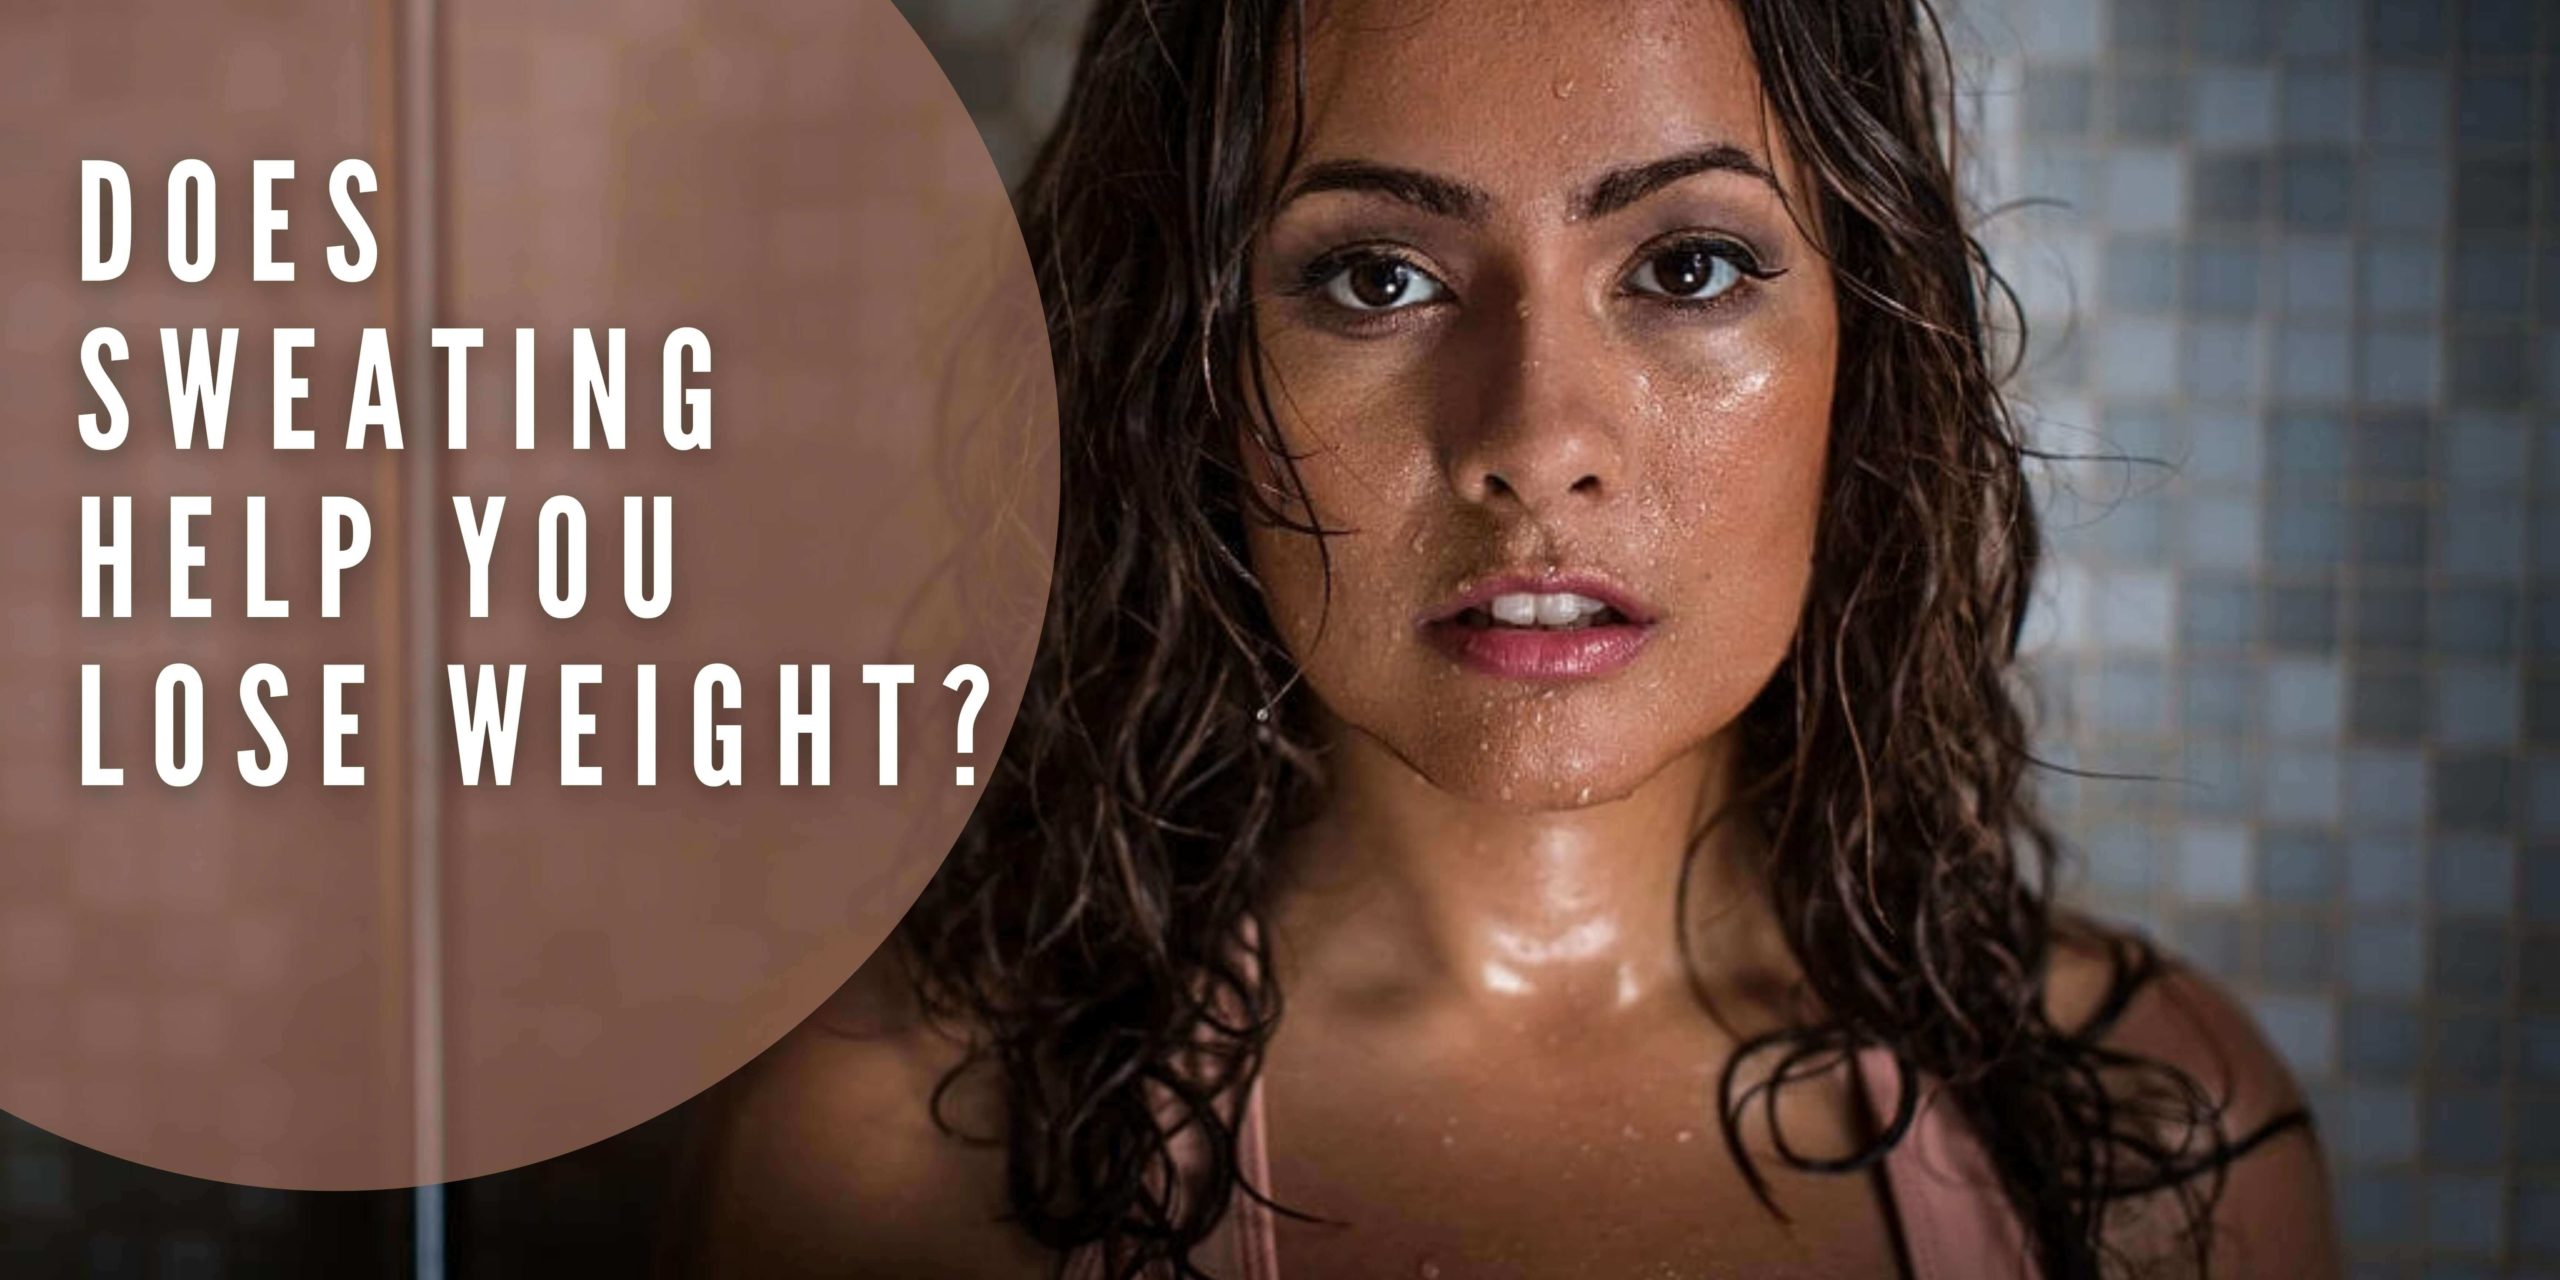 Does Sweating Help You Lose Weight? Facts To Be Noted.